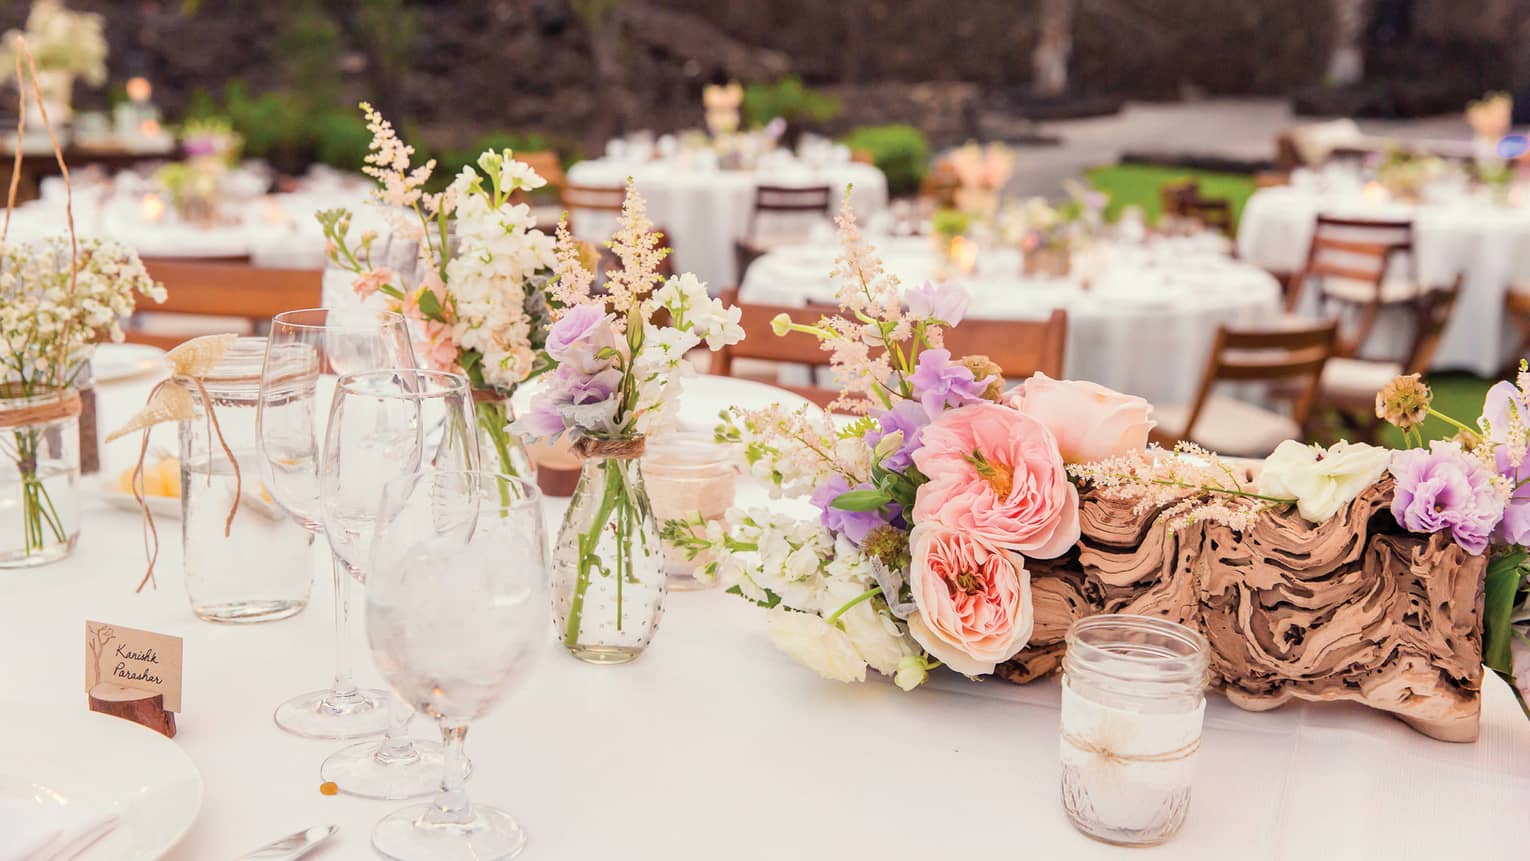 Outdoor wedding reception dining table with pink and purple flowers, glass jars